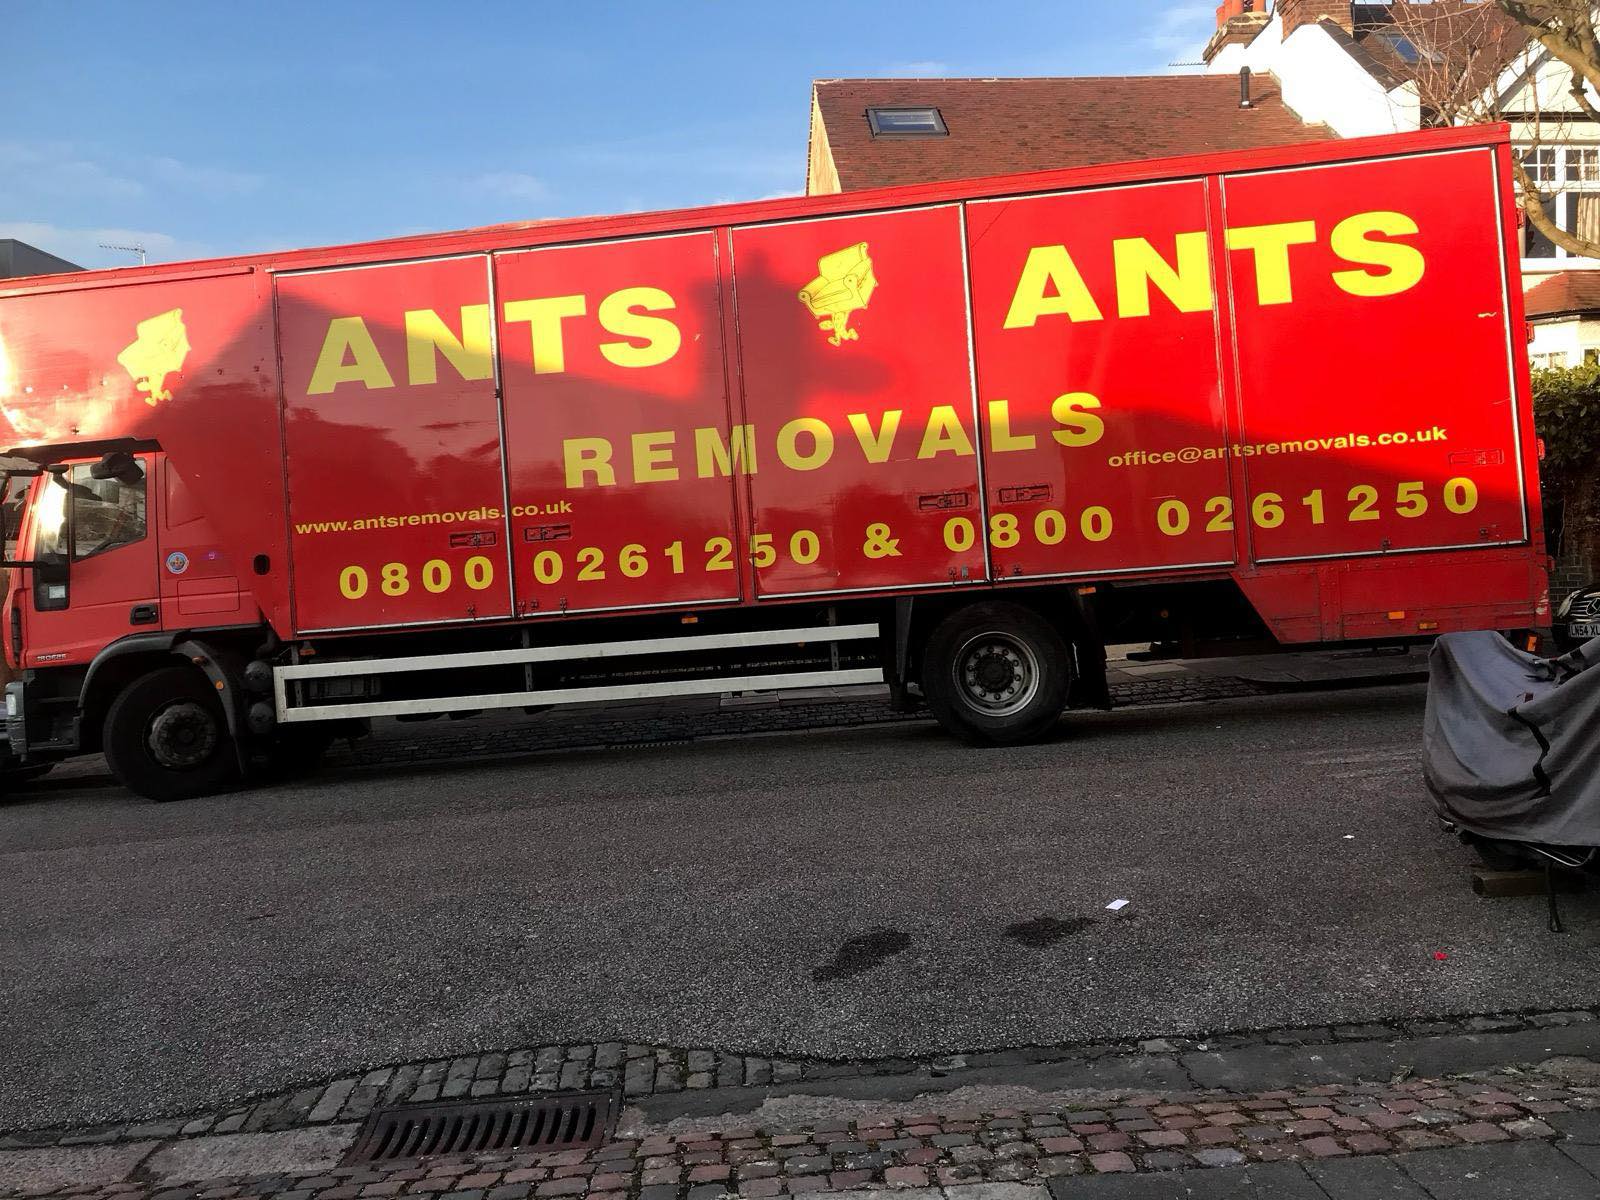 Man and Van by Ants Removals